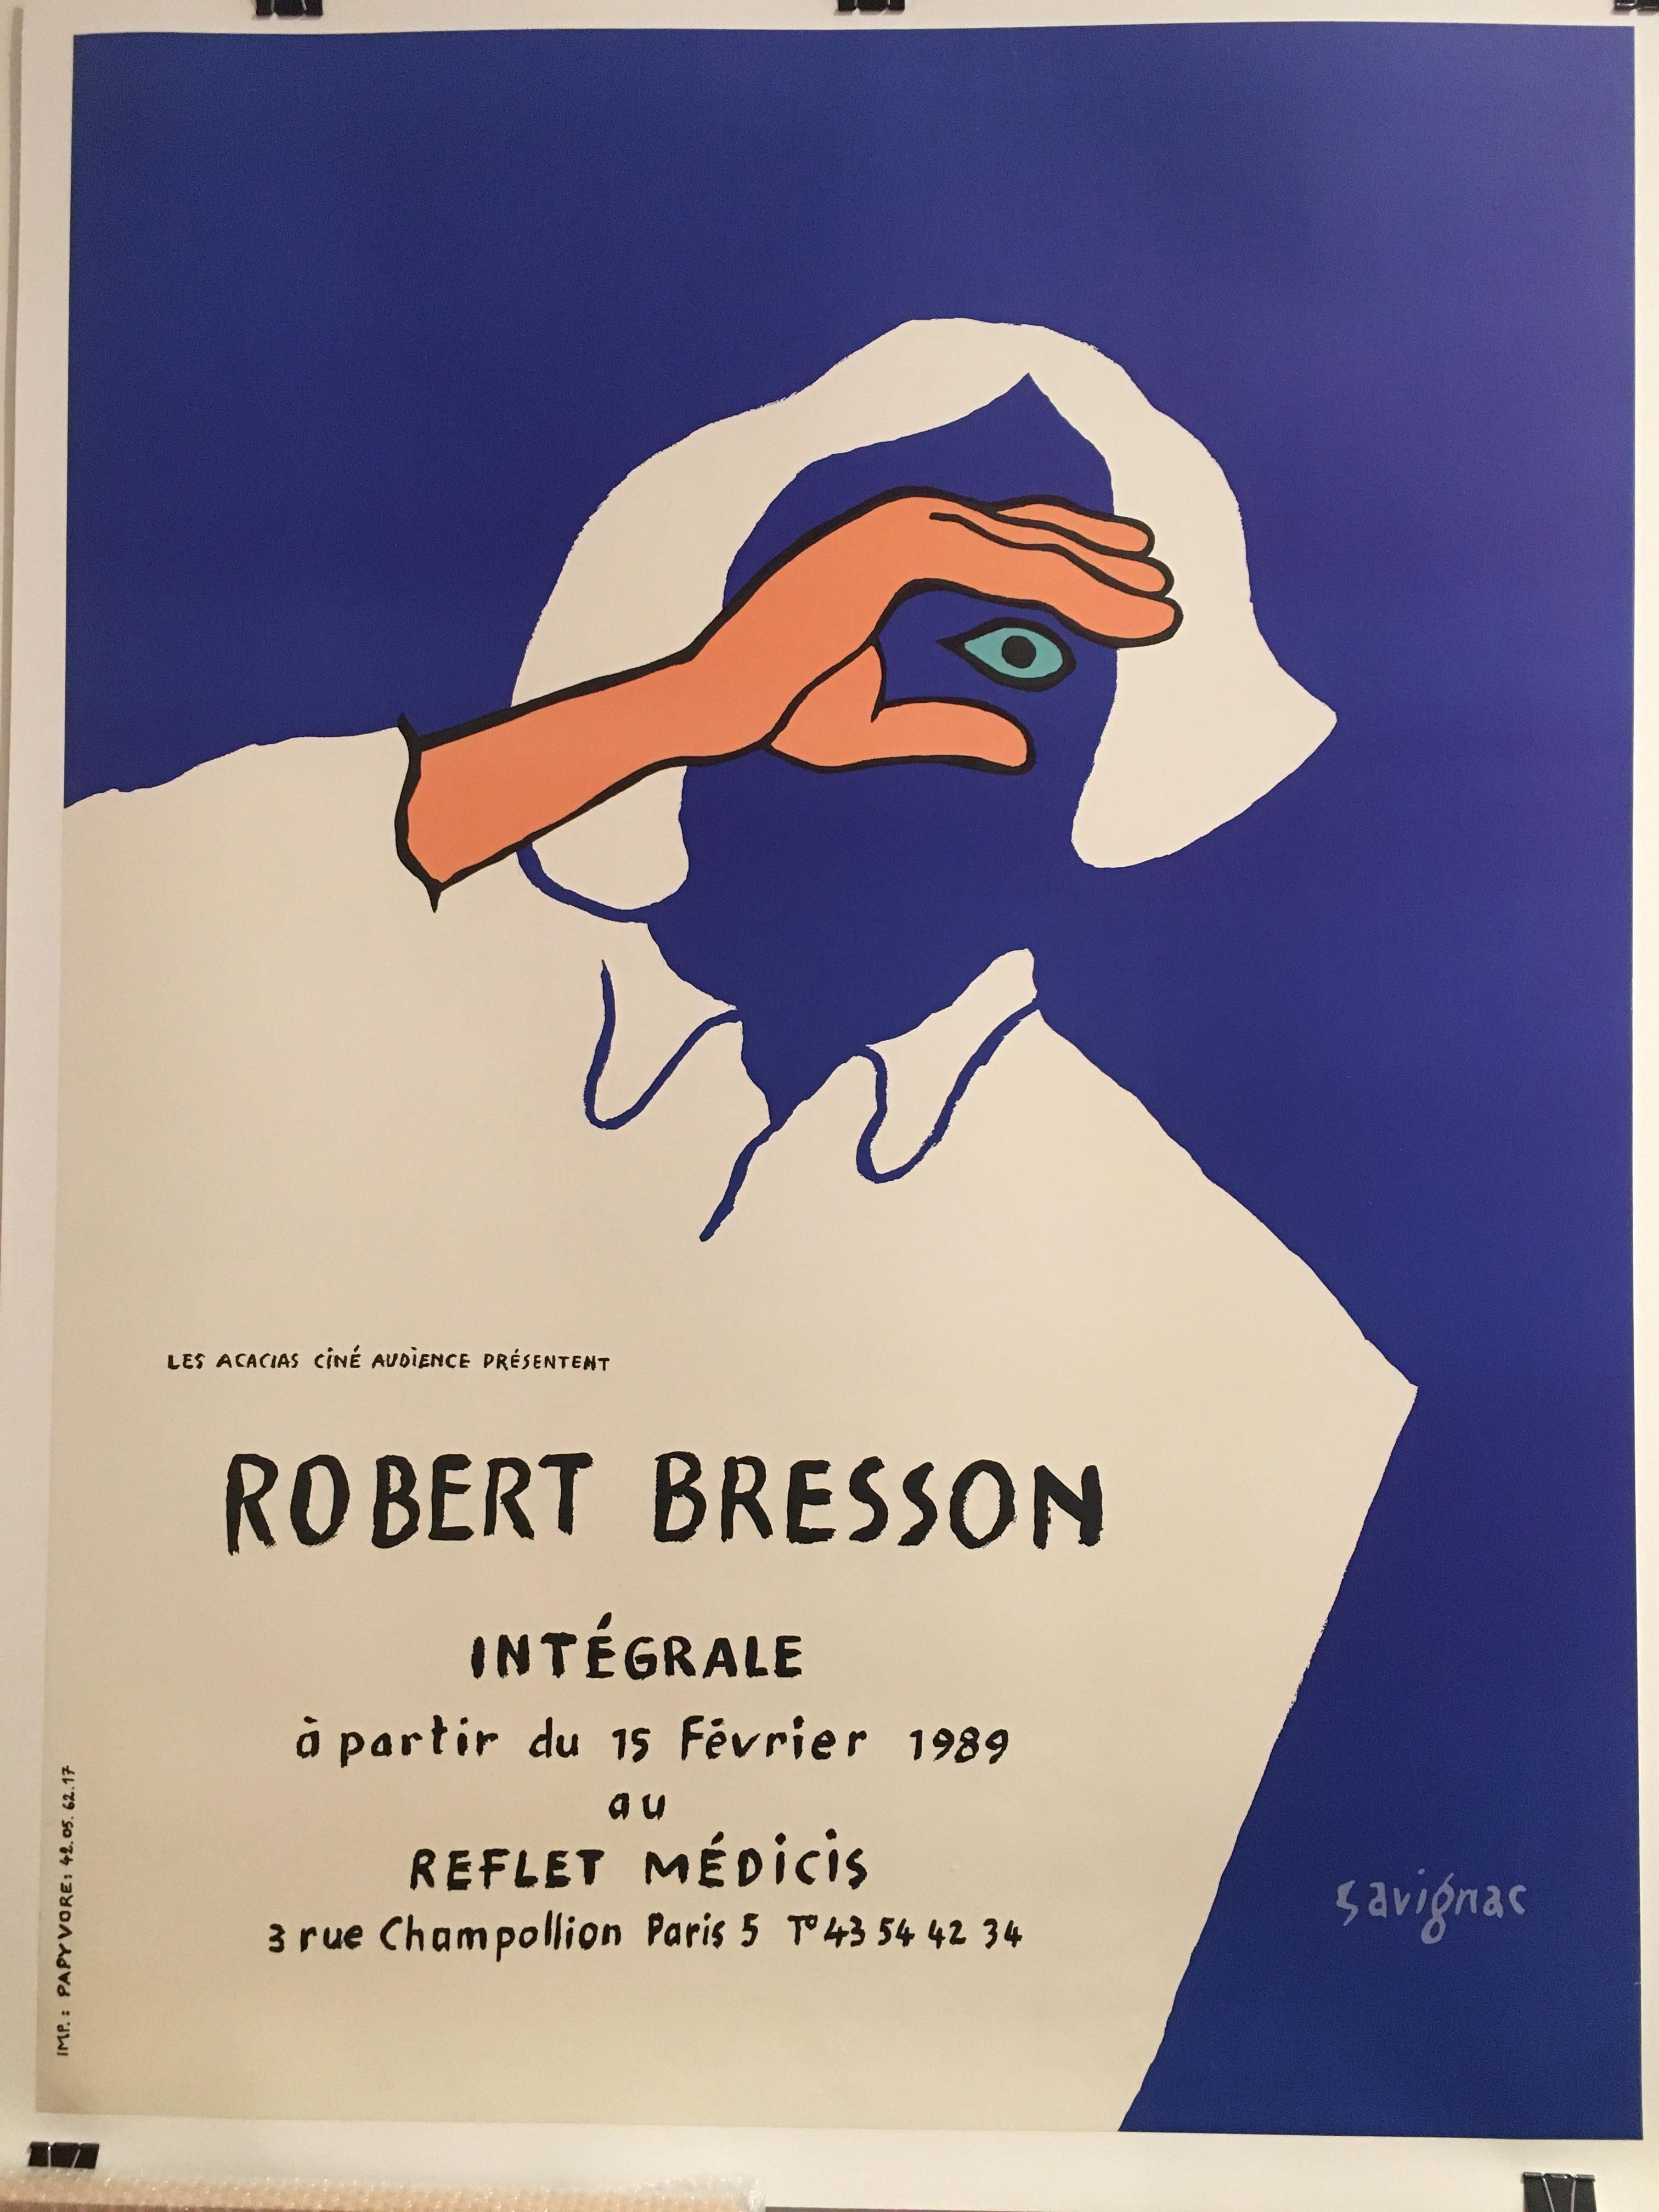 Original vintage poster of Robert Bresson French Film Director by Savignac, 1989

This is an original film poster, it has some small signs of age including fold marks. This poster has been linen backed for preservation.

